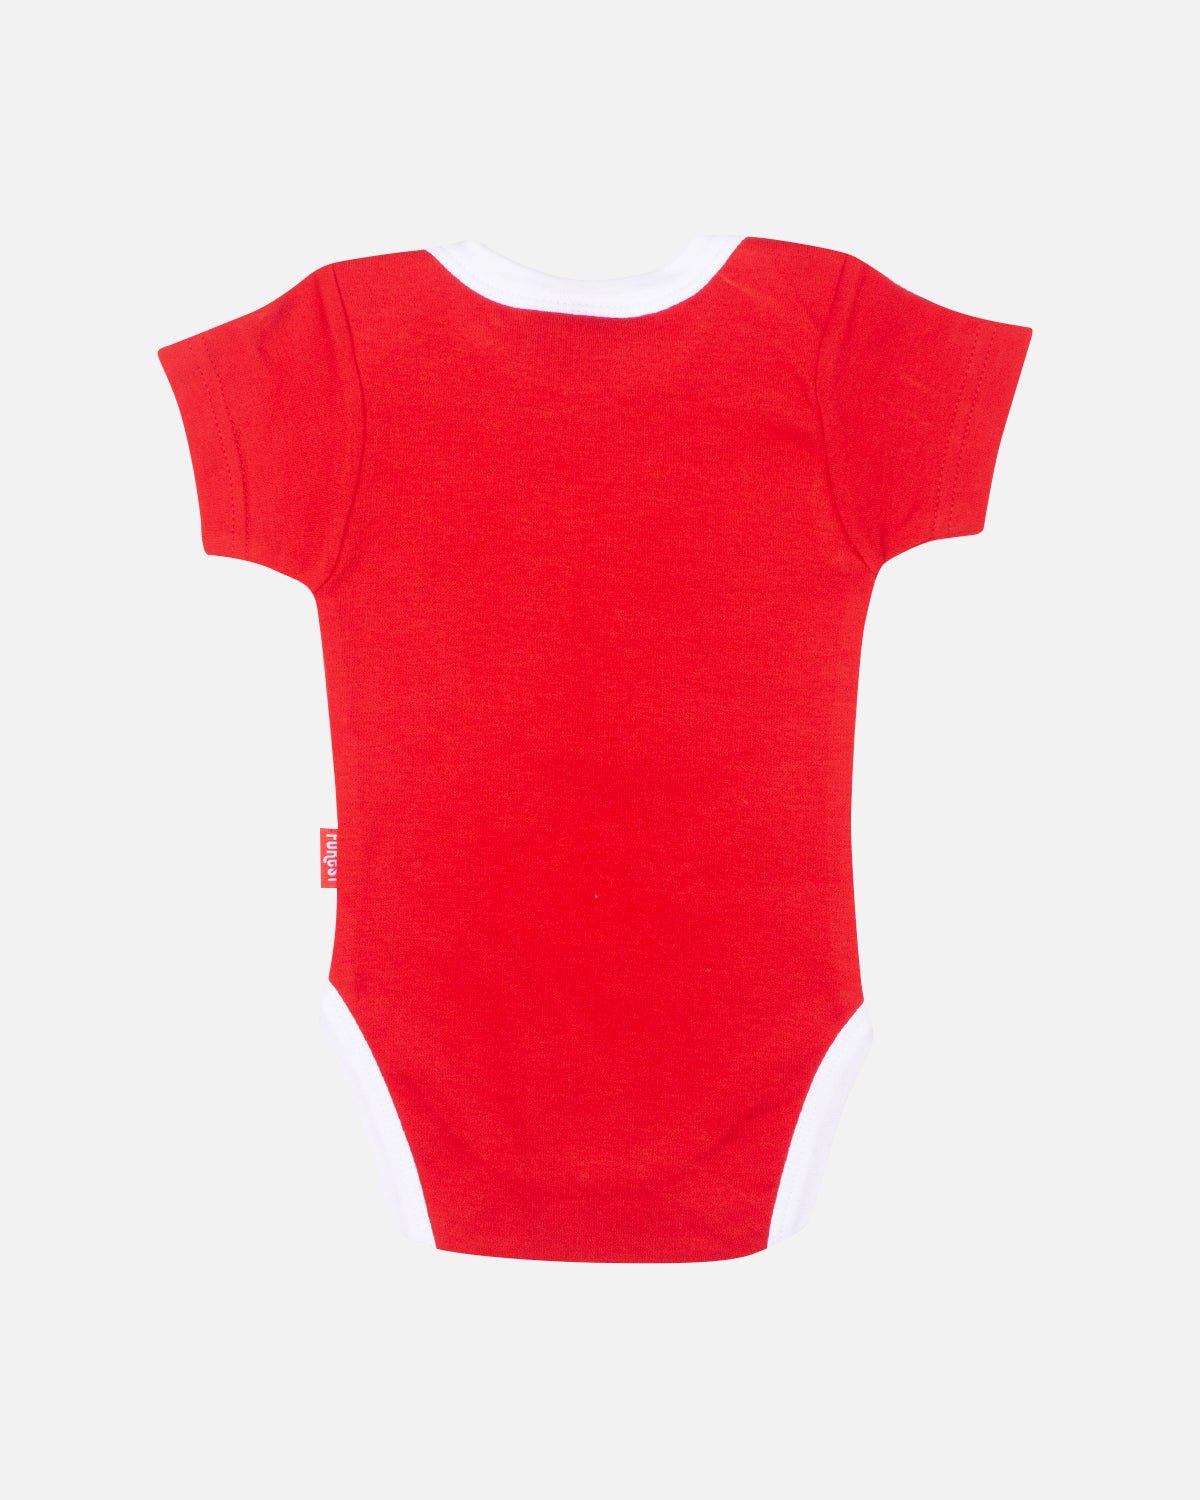 NFFC Baby Red Bodysuit - Nottingham Forest FC